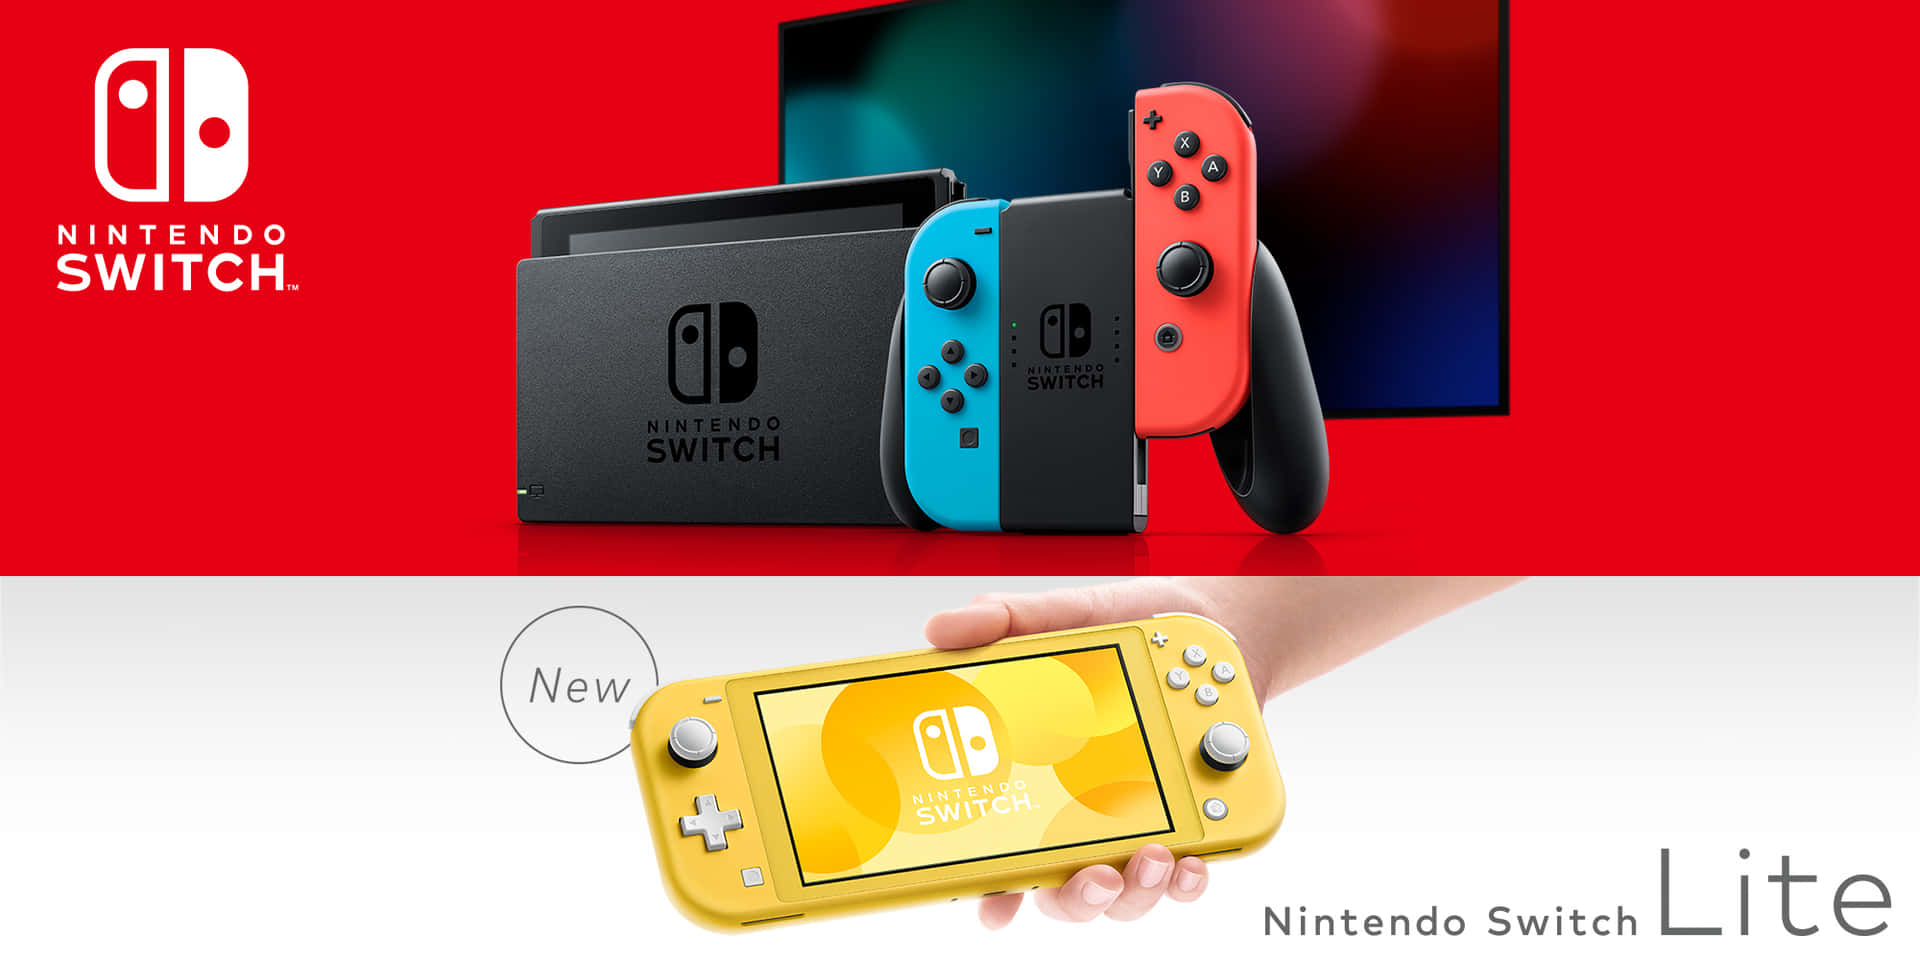 Experience the unlimited possibilities of the Nintendo Switch console